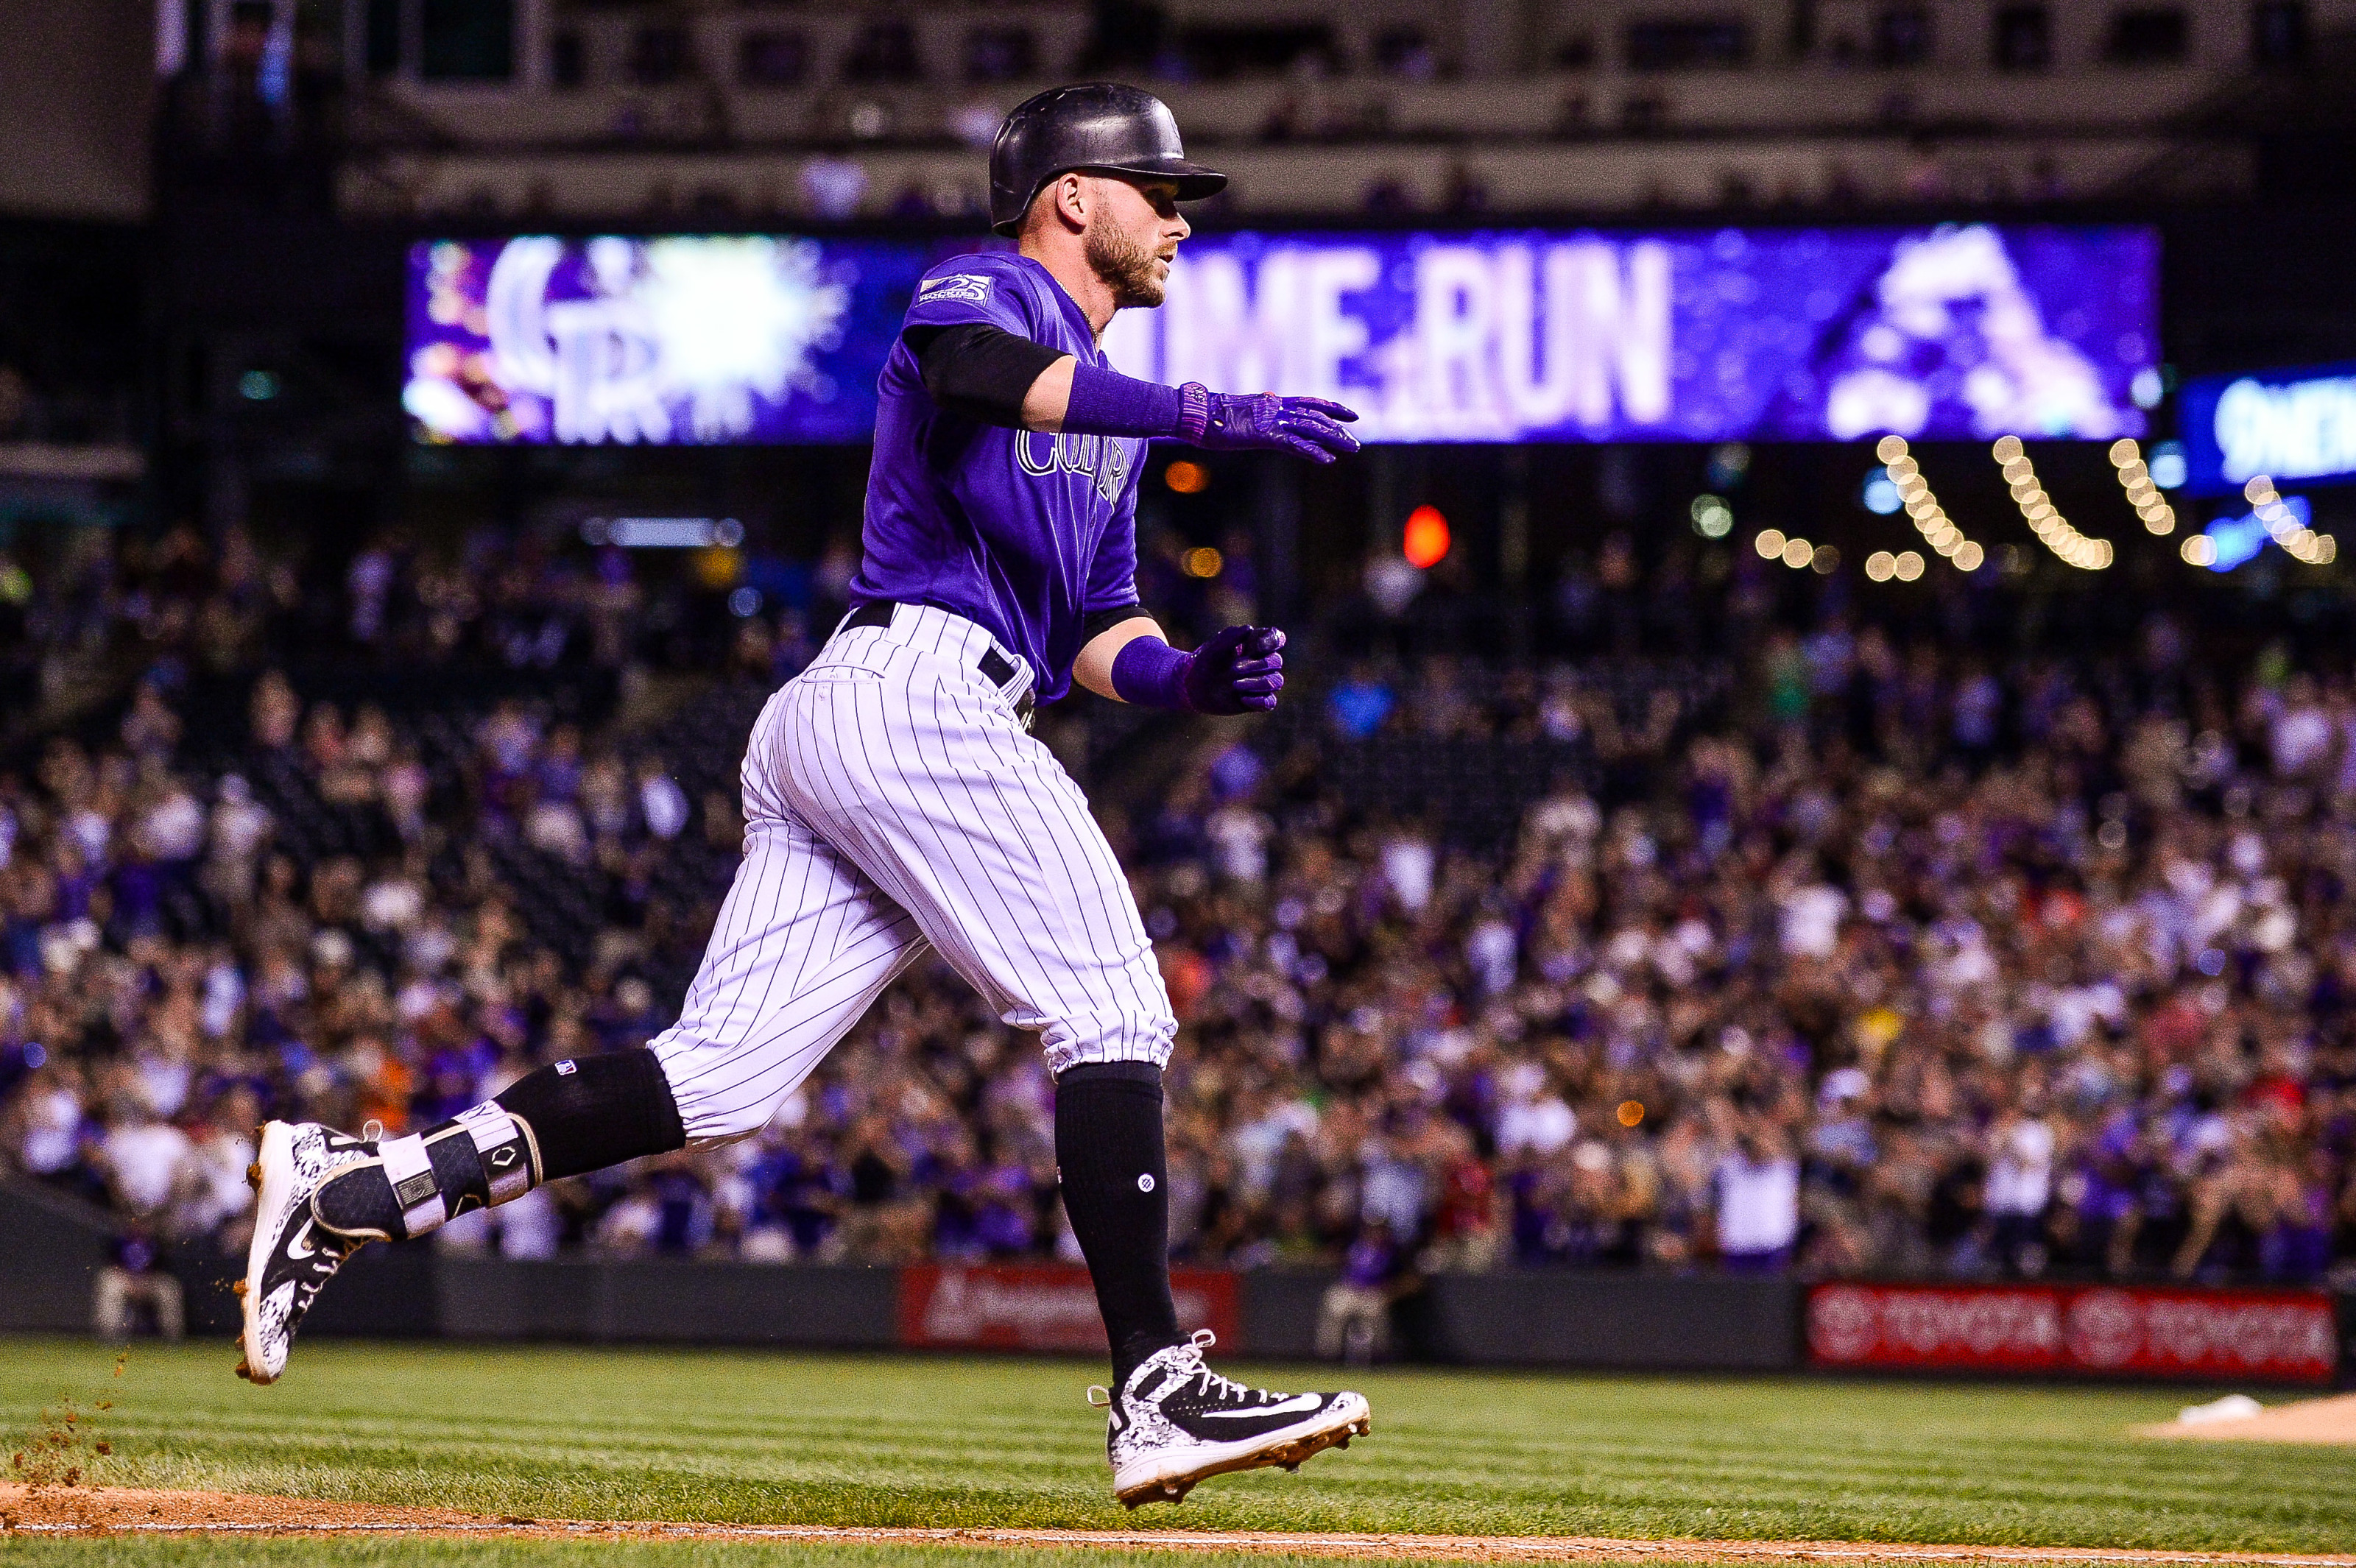 Trevor Story Becomes 1st Player Since 1900 to Hit a HR in 1st 3